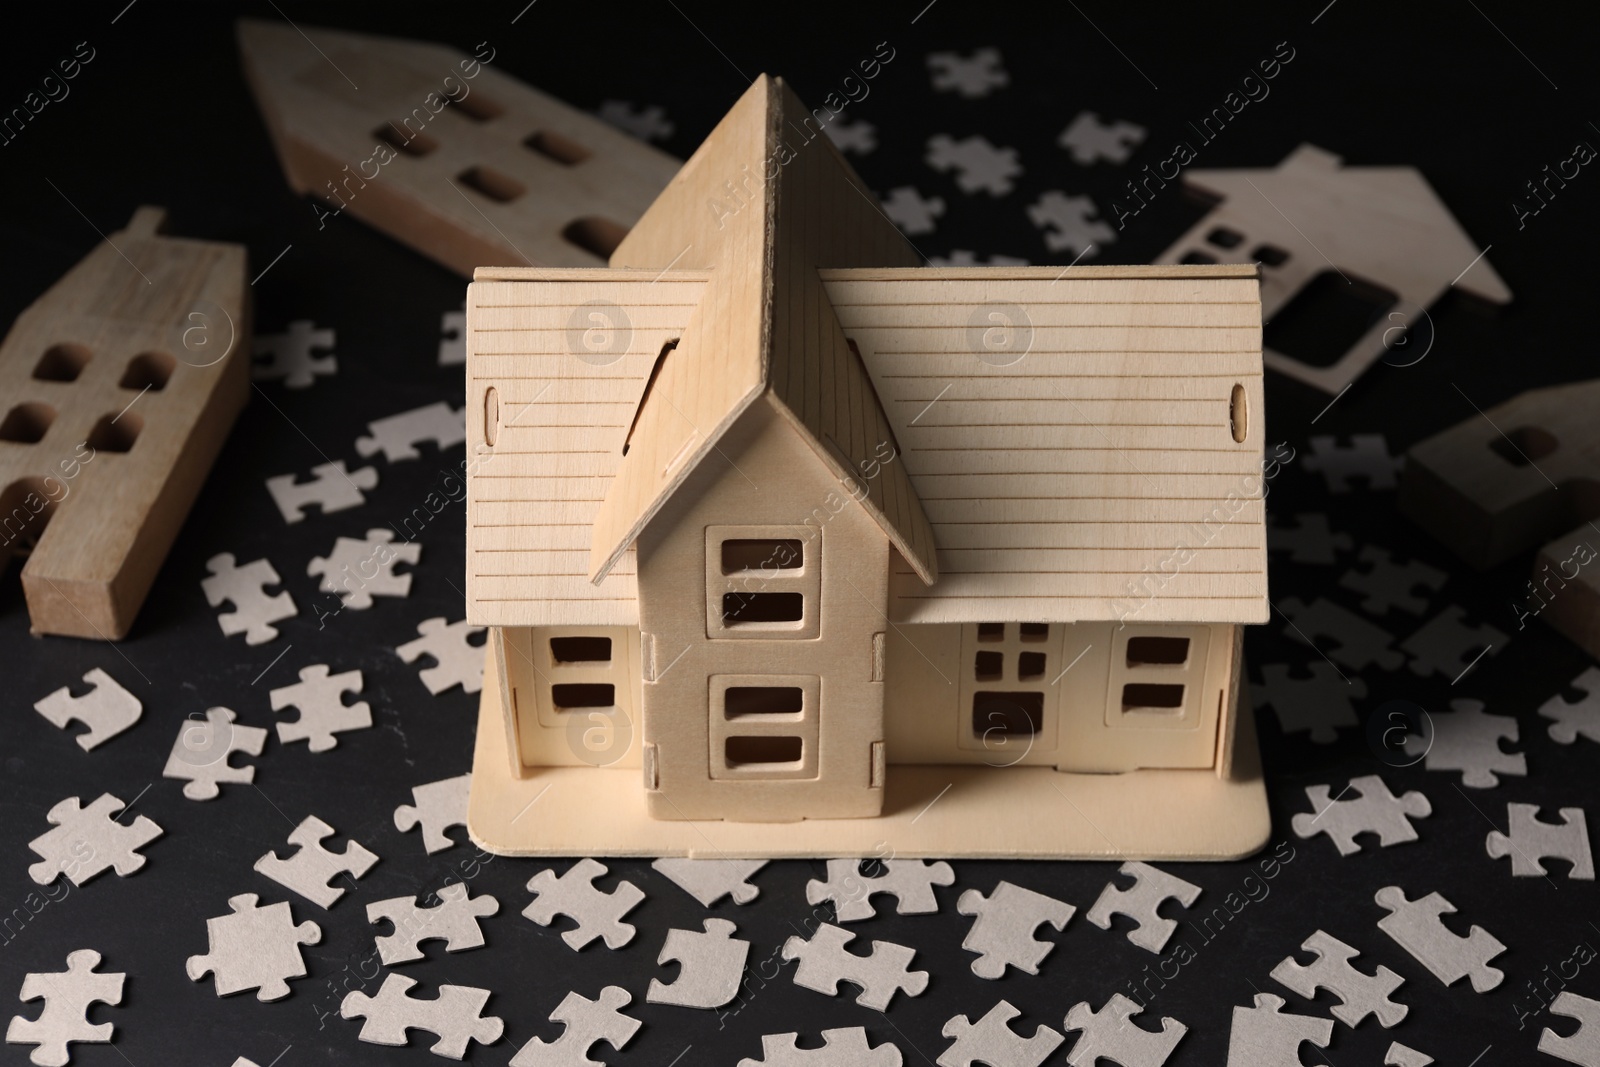 Photo of House model and puzzles on black table depicting destruction after earthquake